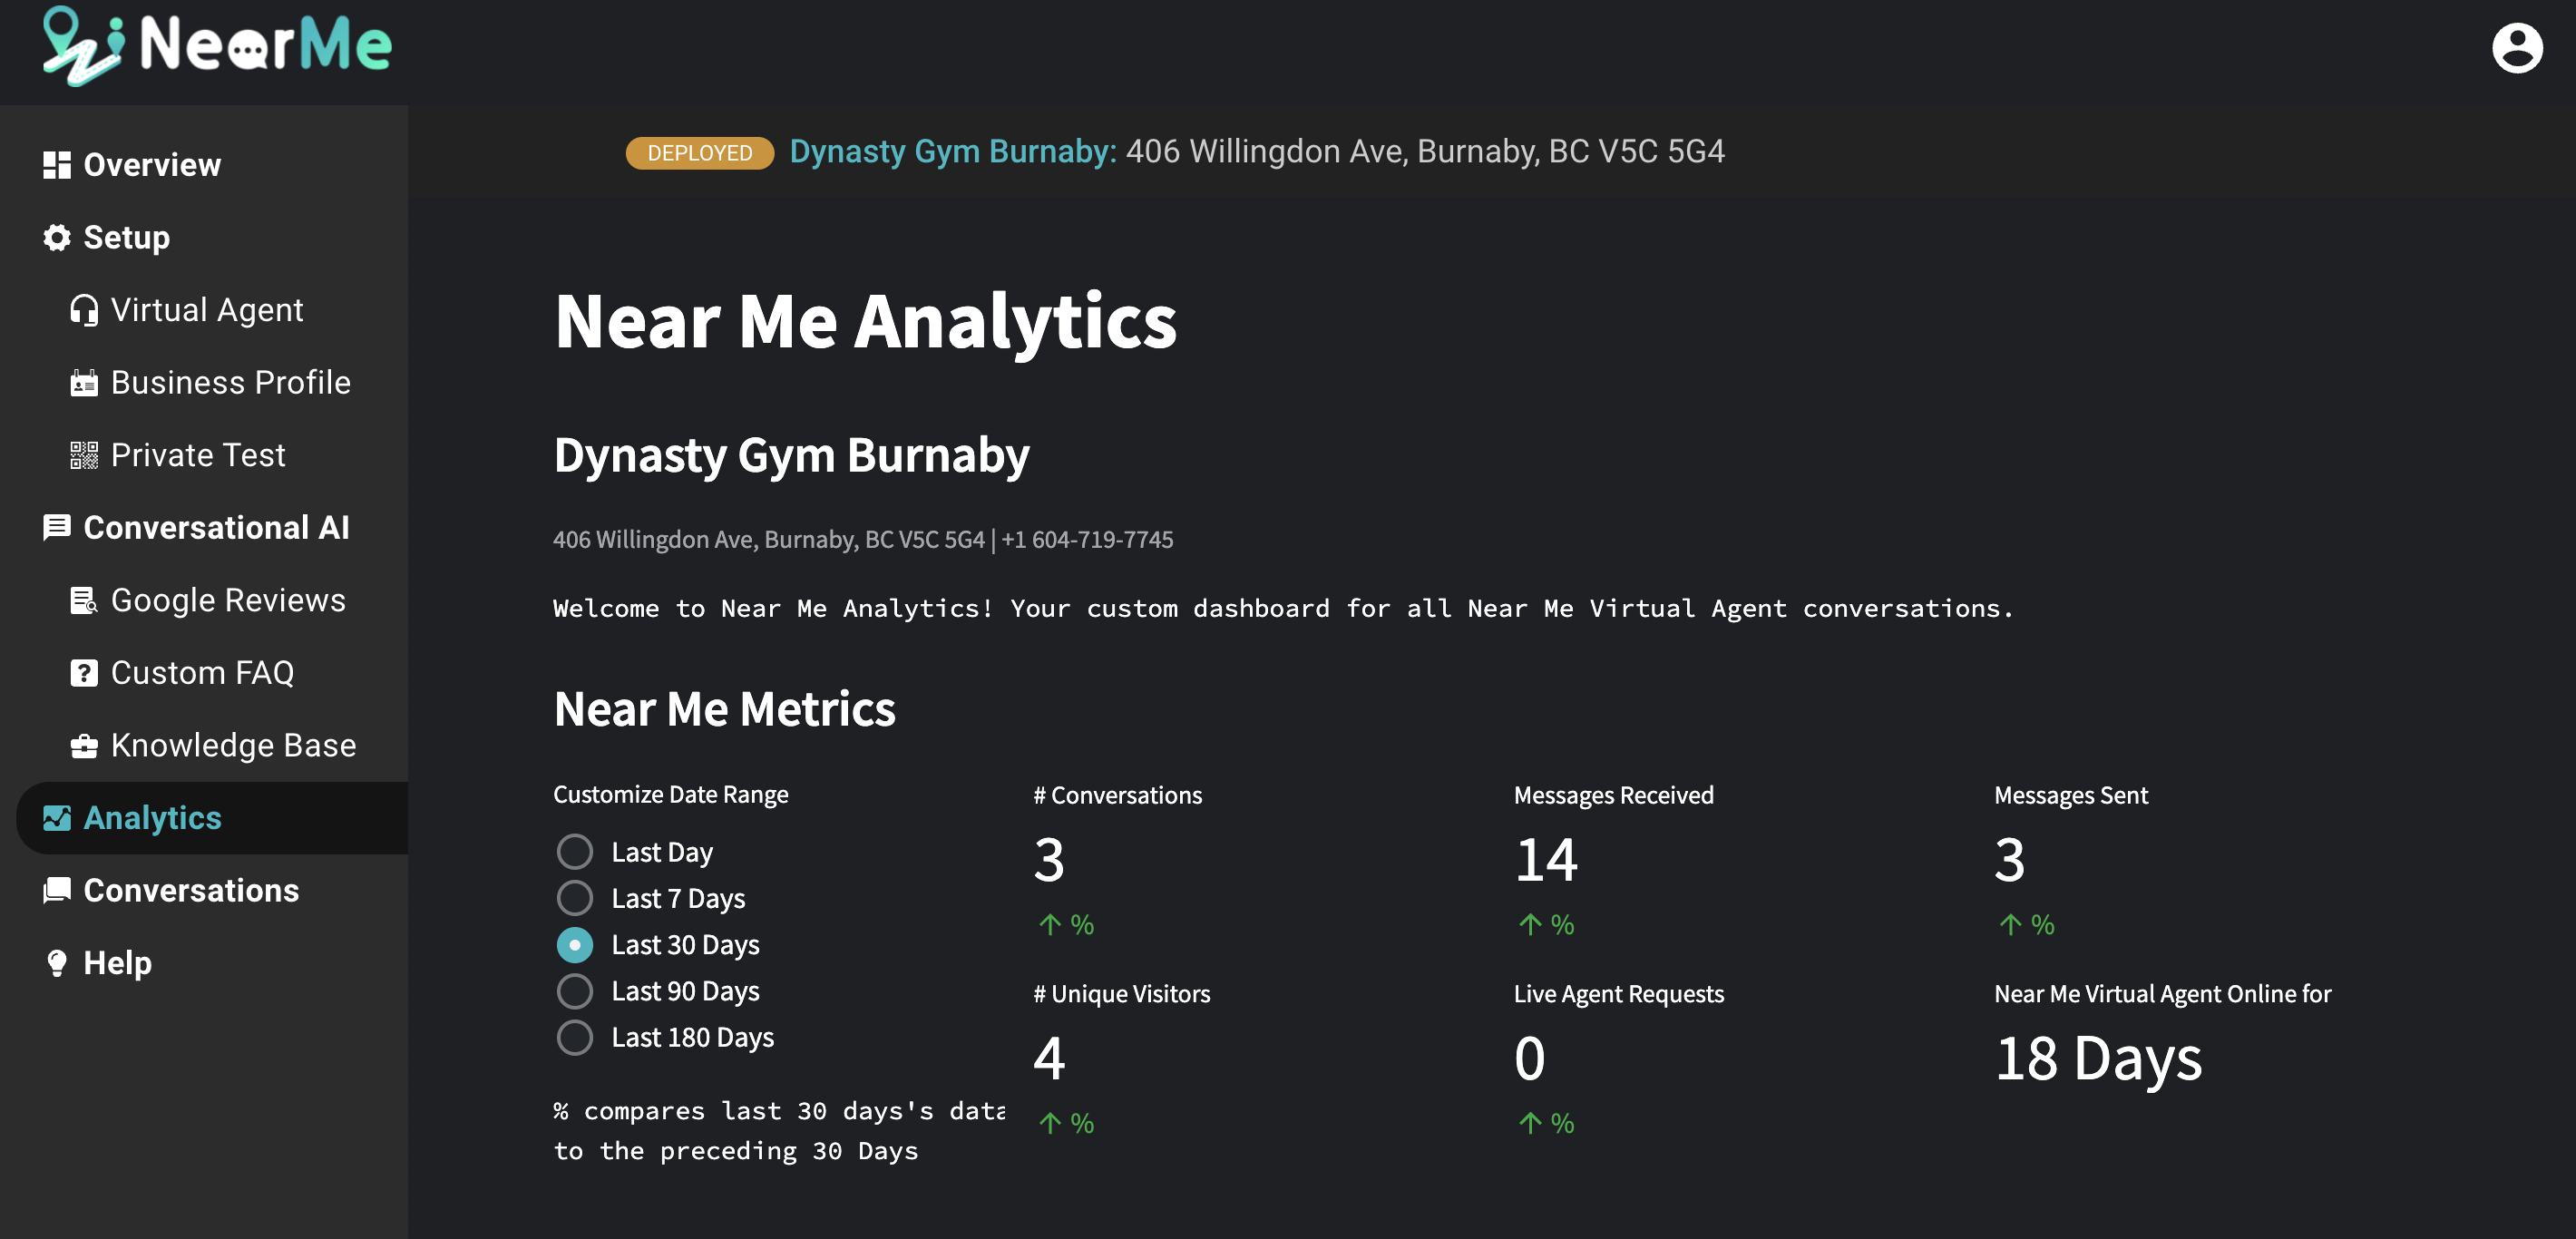 Near Me Analytics gives you insights into your customer messages.